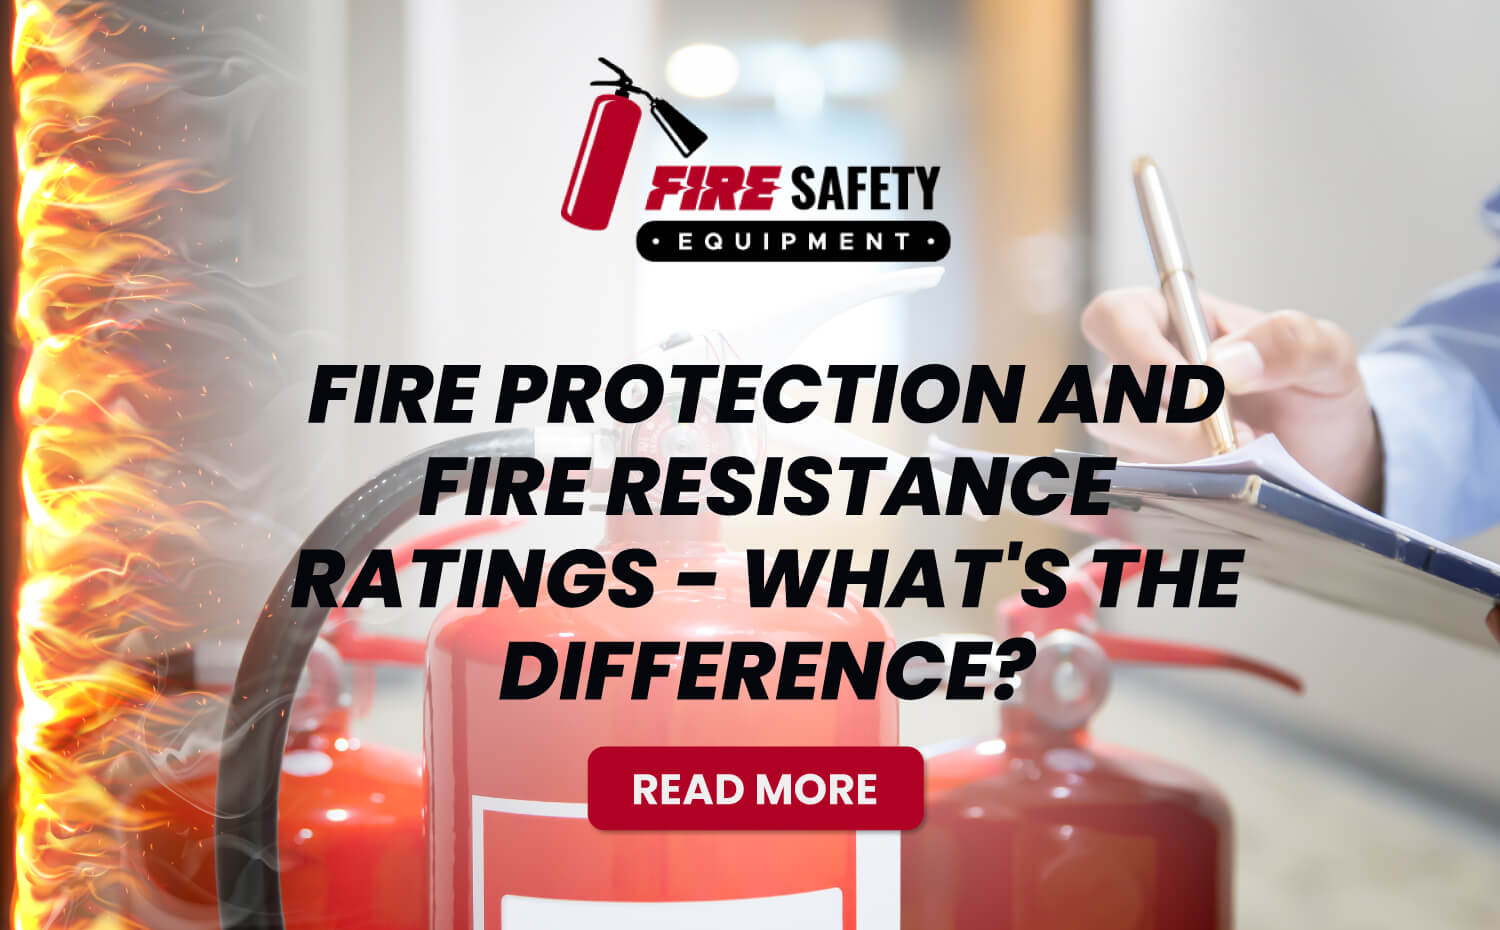 Fire Protection and Fire Resistance Ratings - What's the Difference?